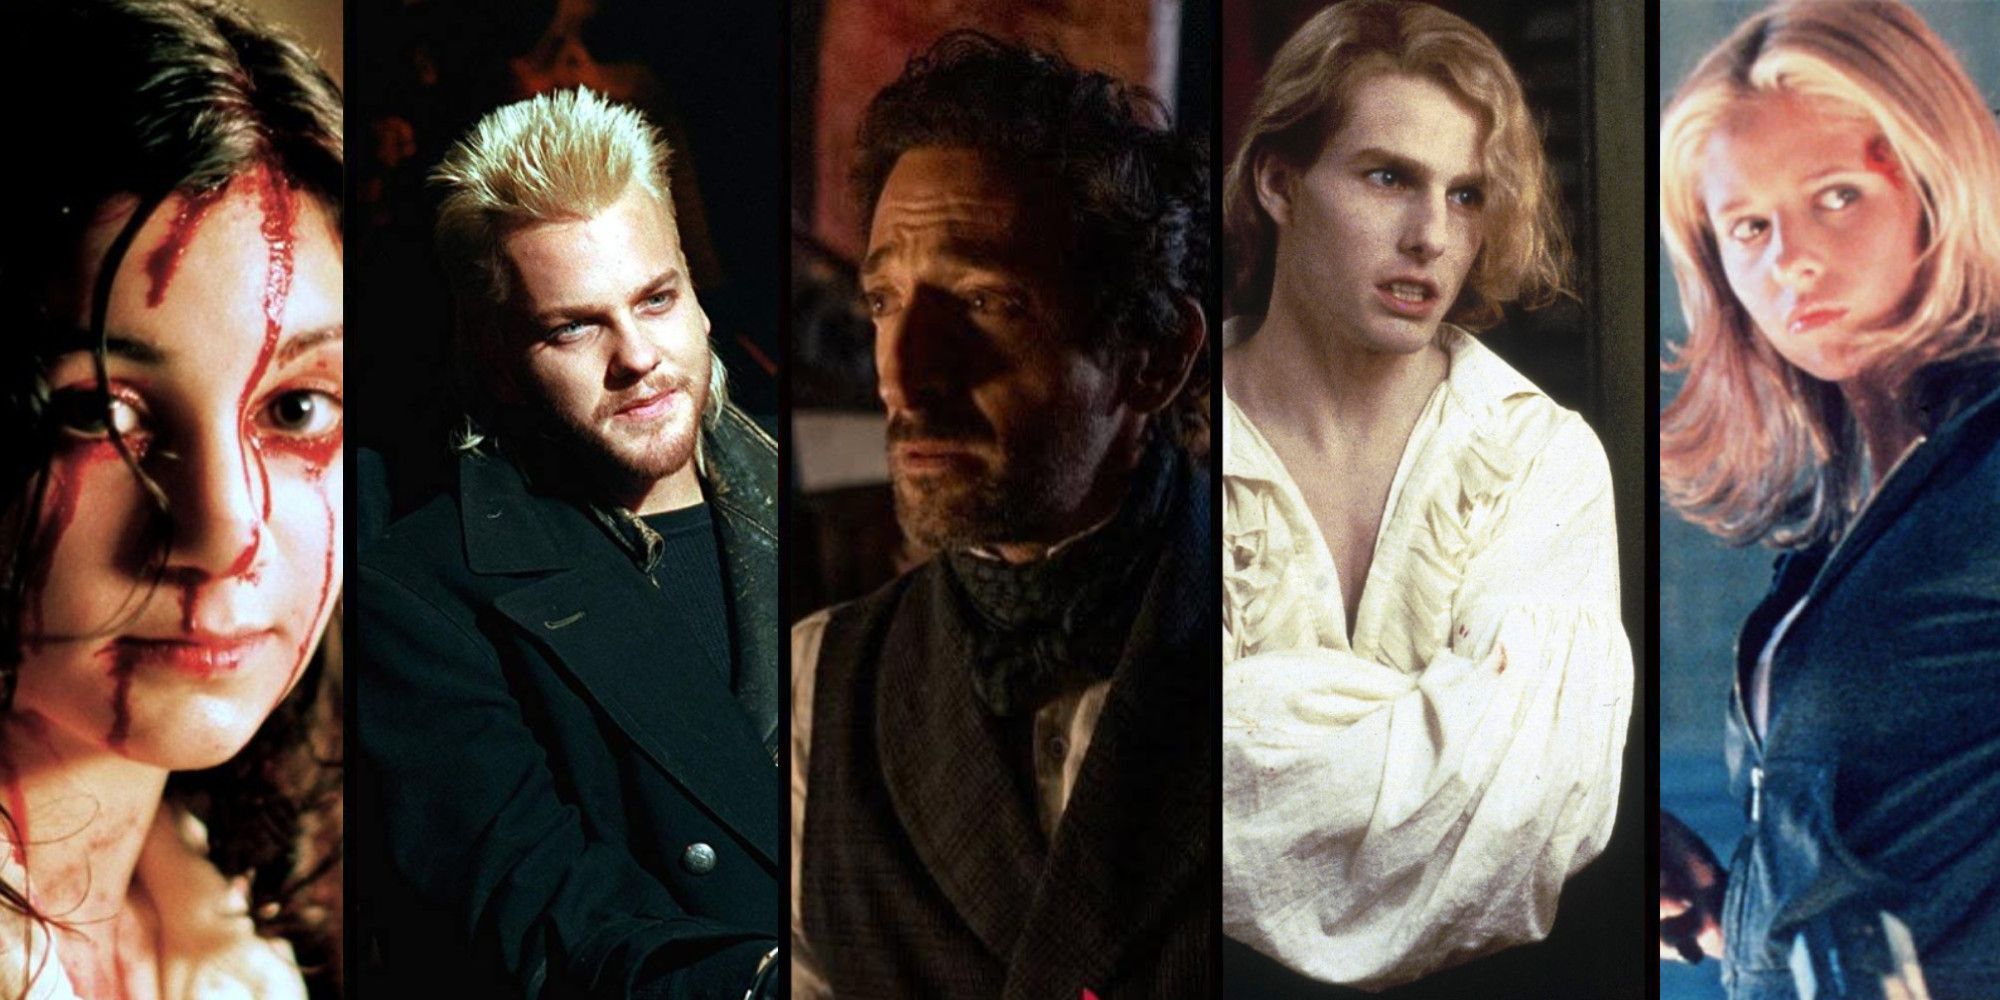 Let The Right One In, The Lost Boys, Chapelwaite, Interview With The Vampire, Buffy the Vampire Slayer